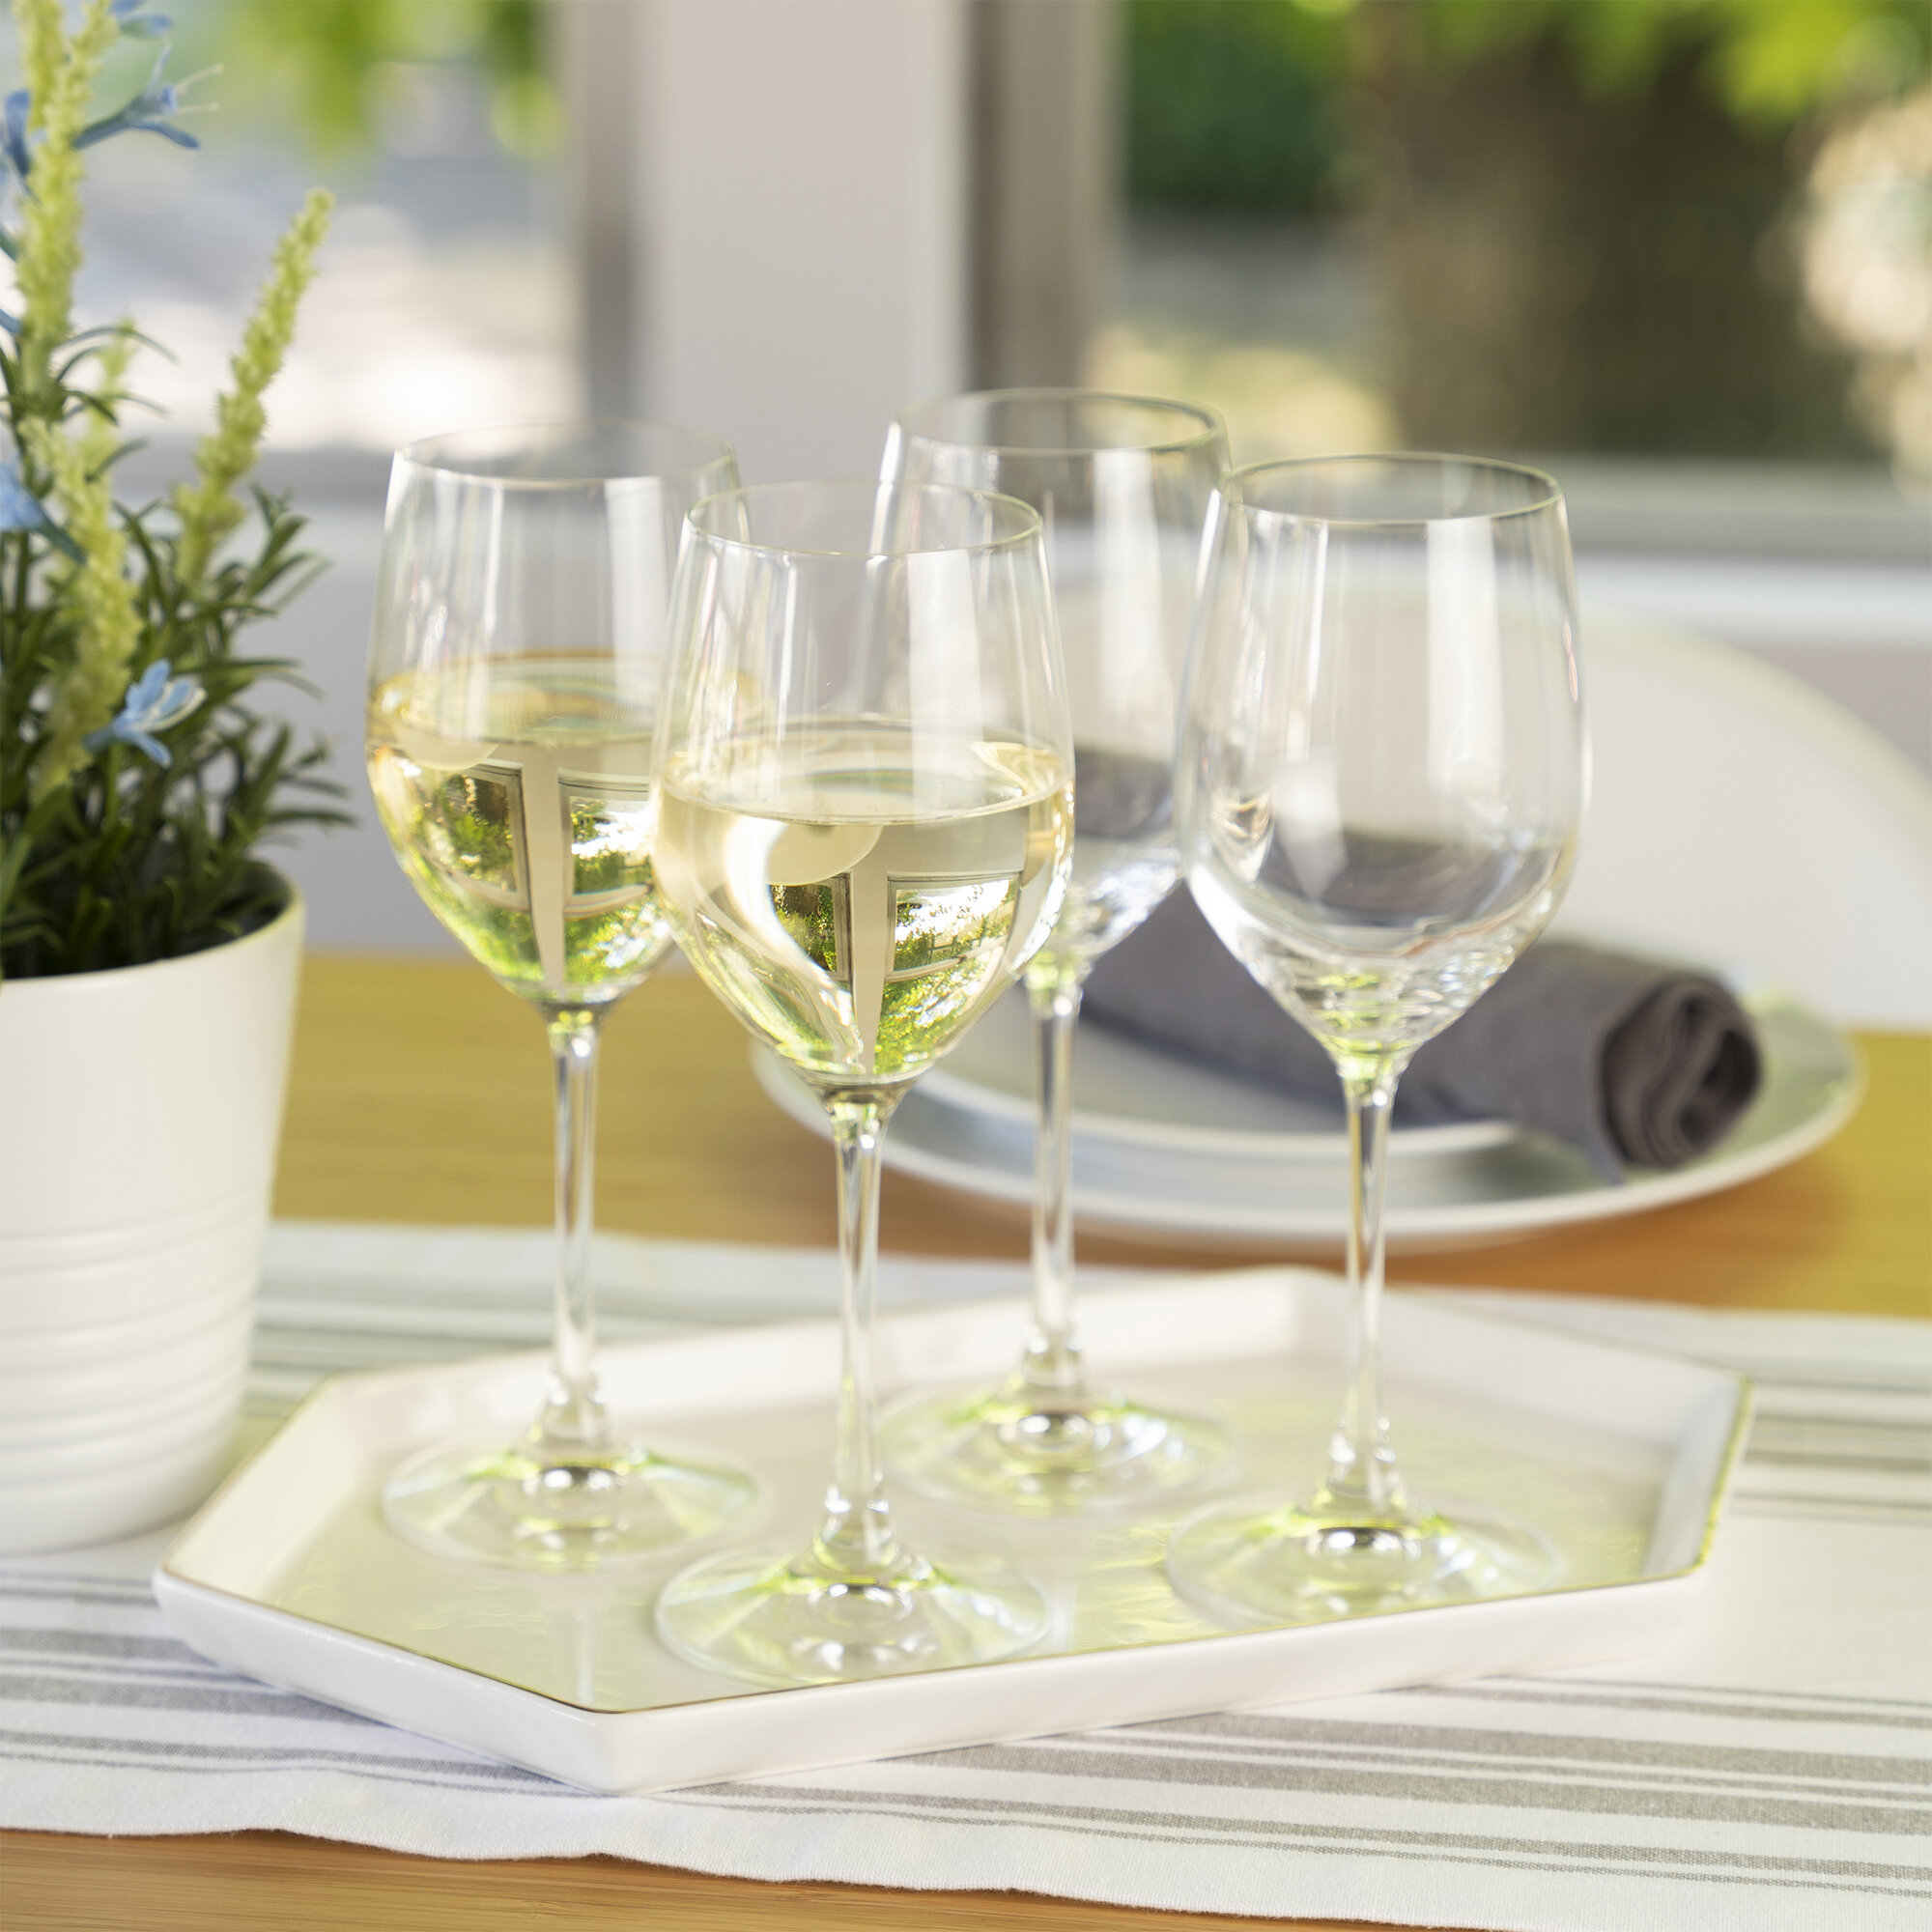 How to Choose the Best Wine Glass - Vinum 55